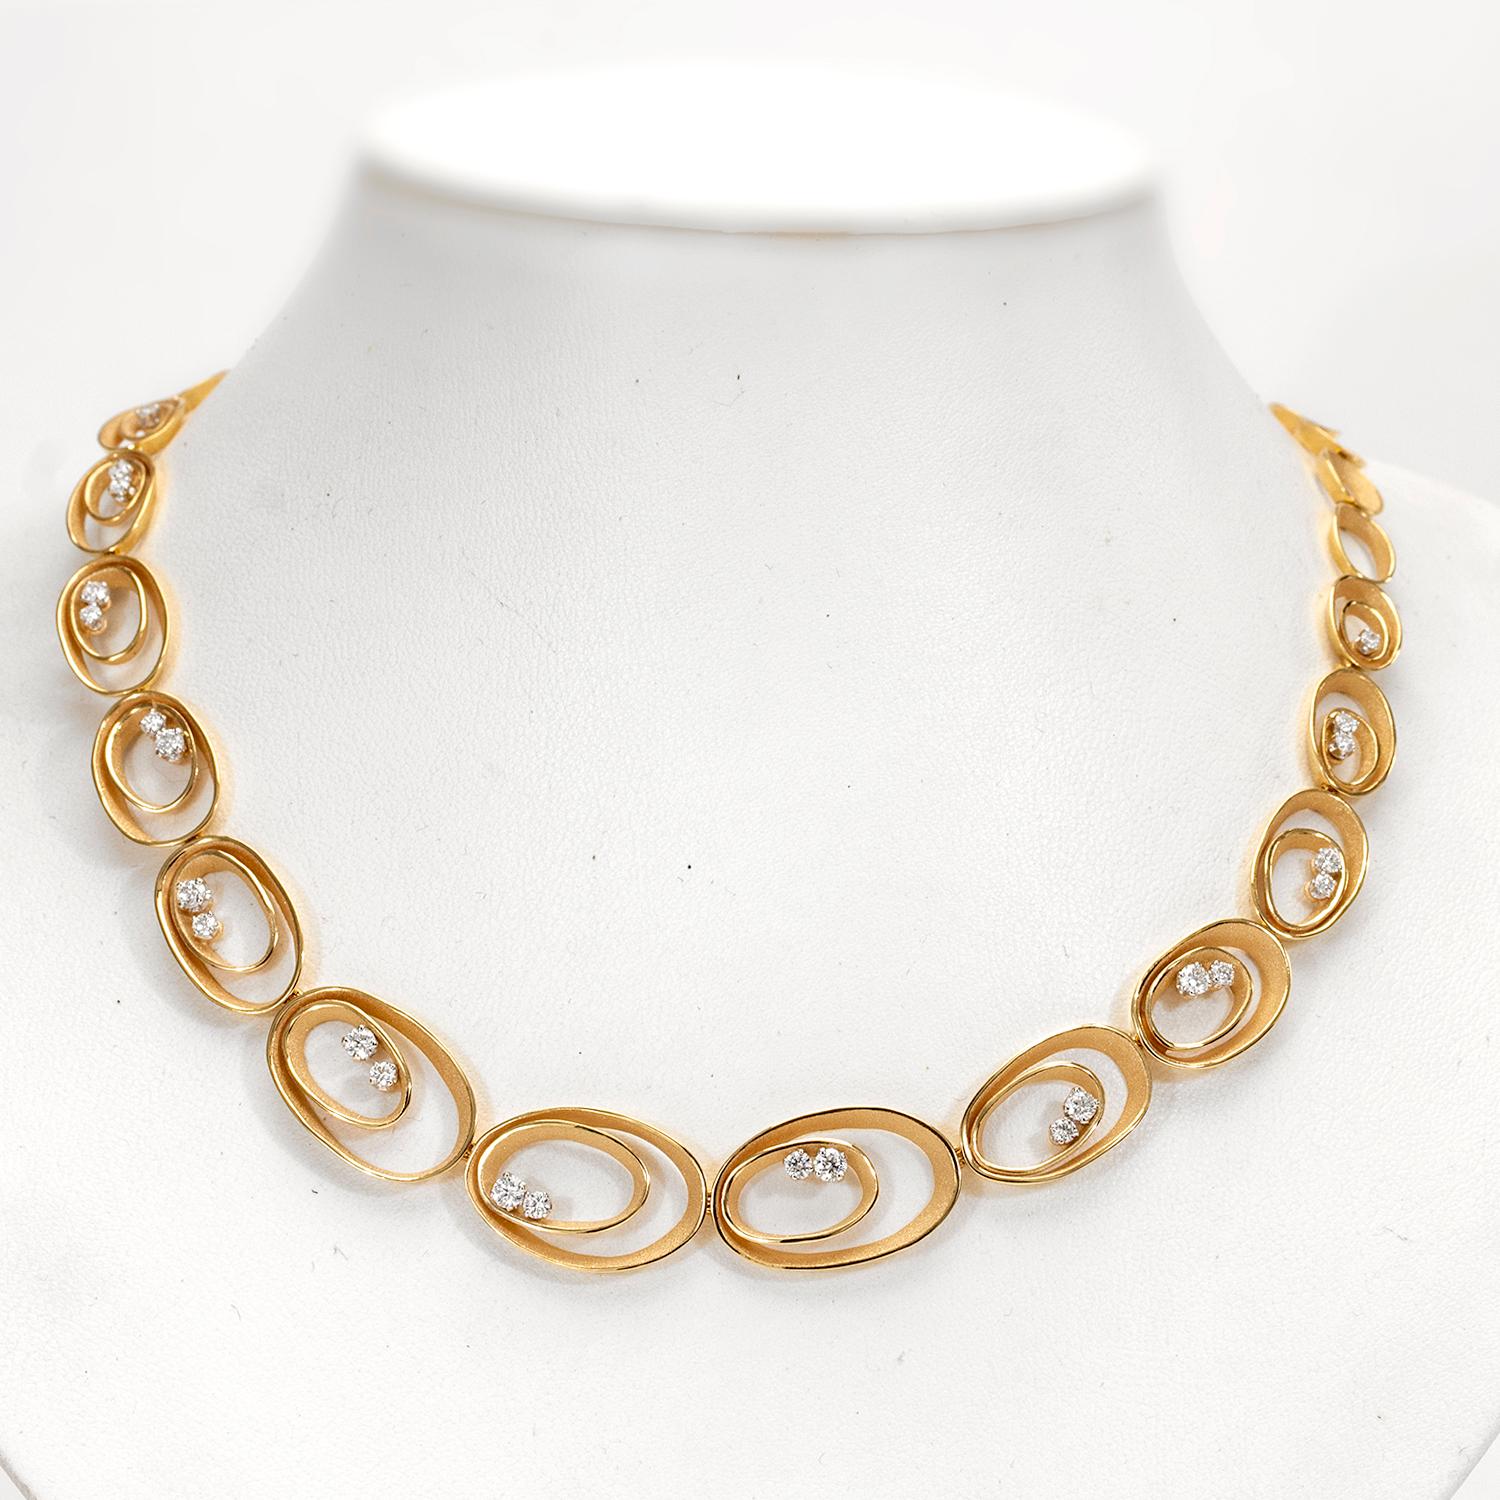 From Annamaria Cammilli's Essential collection, Dune collar necklace handcrafted in 18 karat Apricot Orange gold. Twenty four brilliant white diamonds at 1.29 carat total weight. Thirty one oval links taper from largest link in the center to